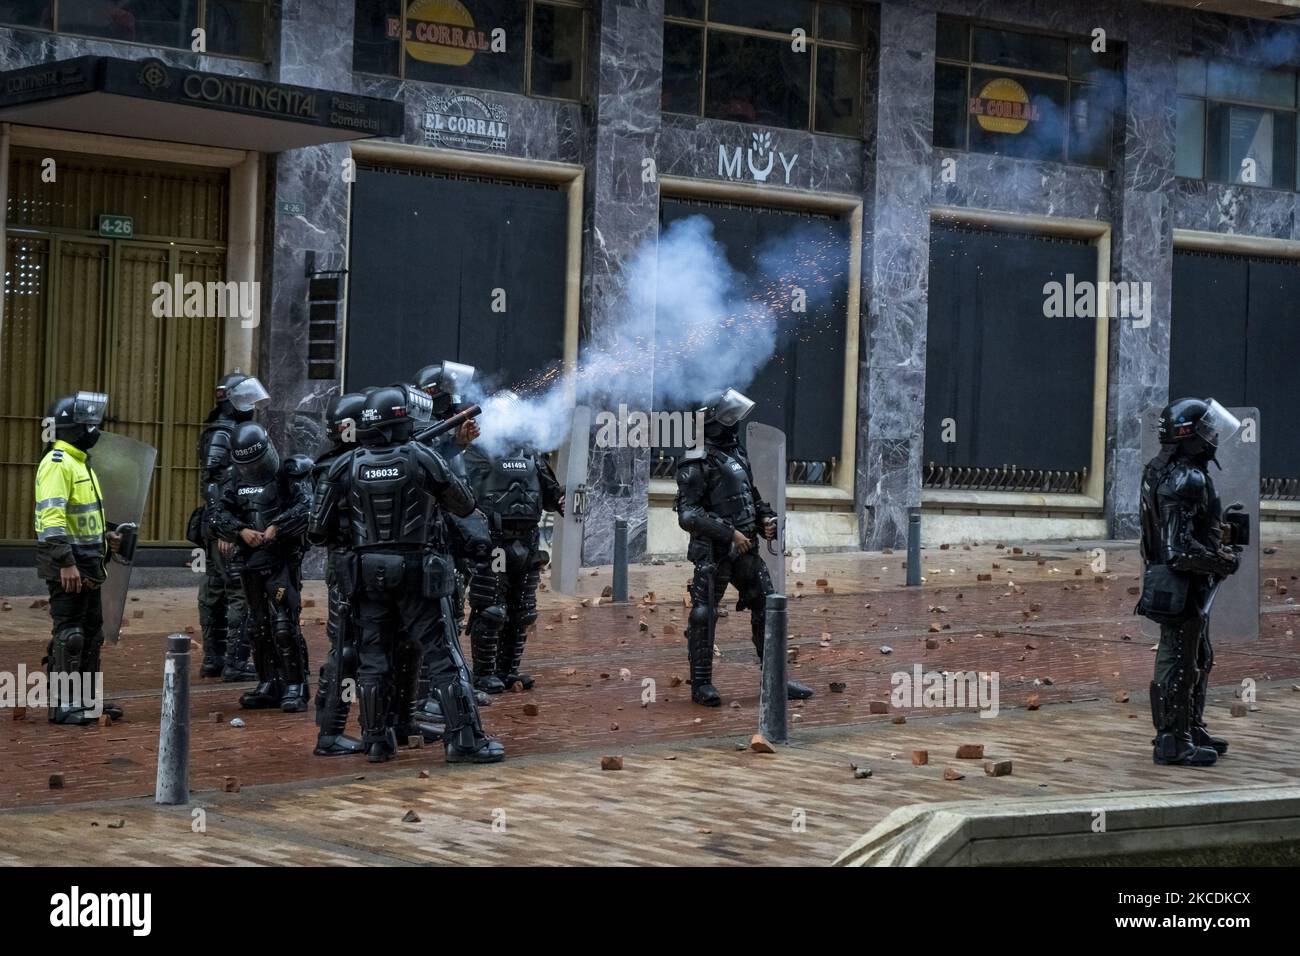 Police officers try to disperse the protesters in the protest against the tax reform proposed by the national government a few weeks ago in Bogota, Colombia, on April 28, 2021. (Photo by David Rodriguez/NurPhoto) Stock Photo